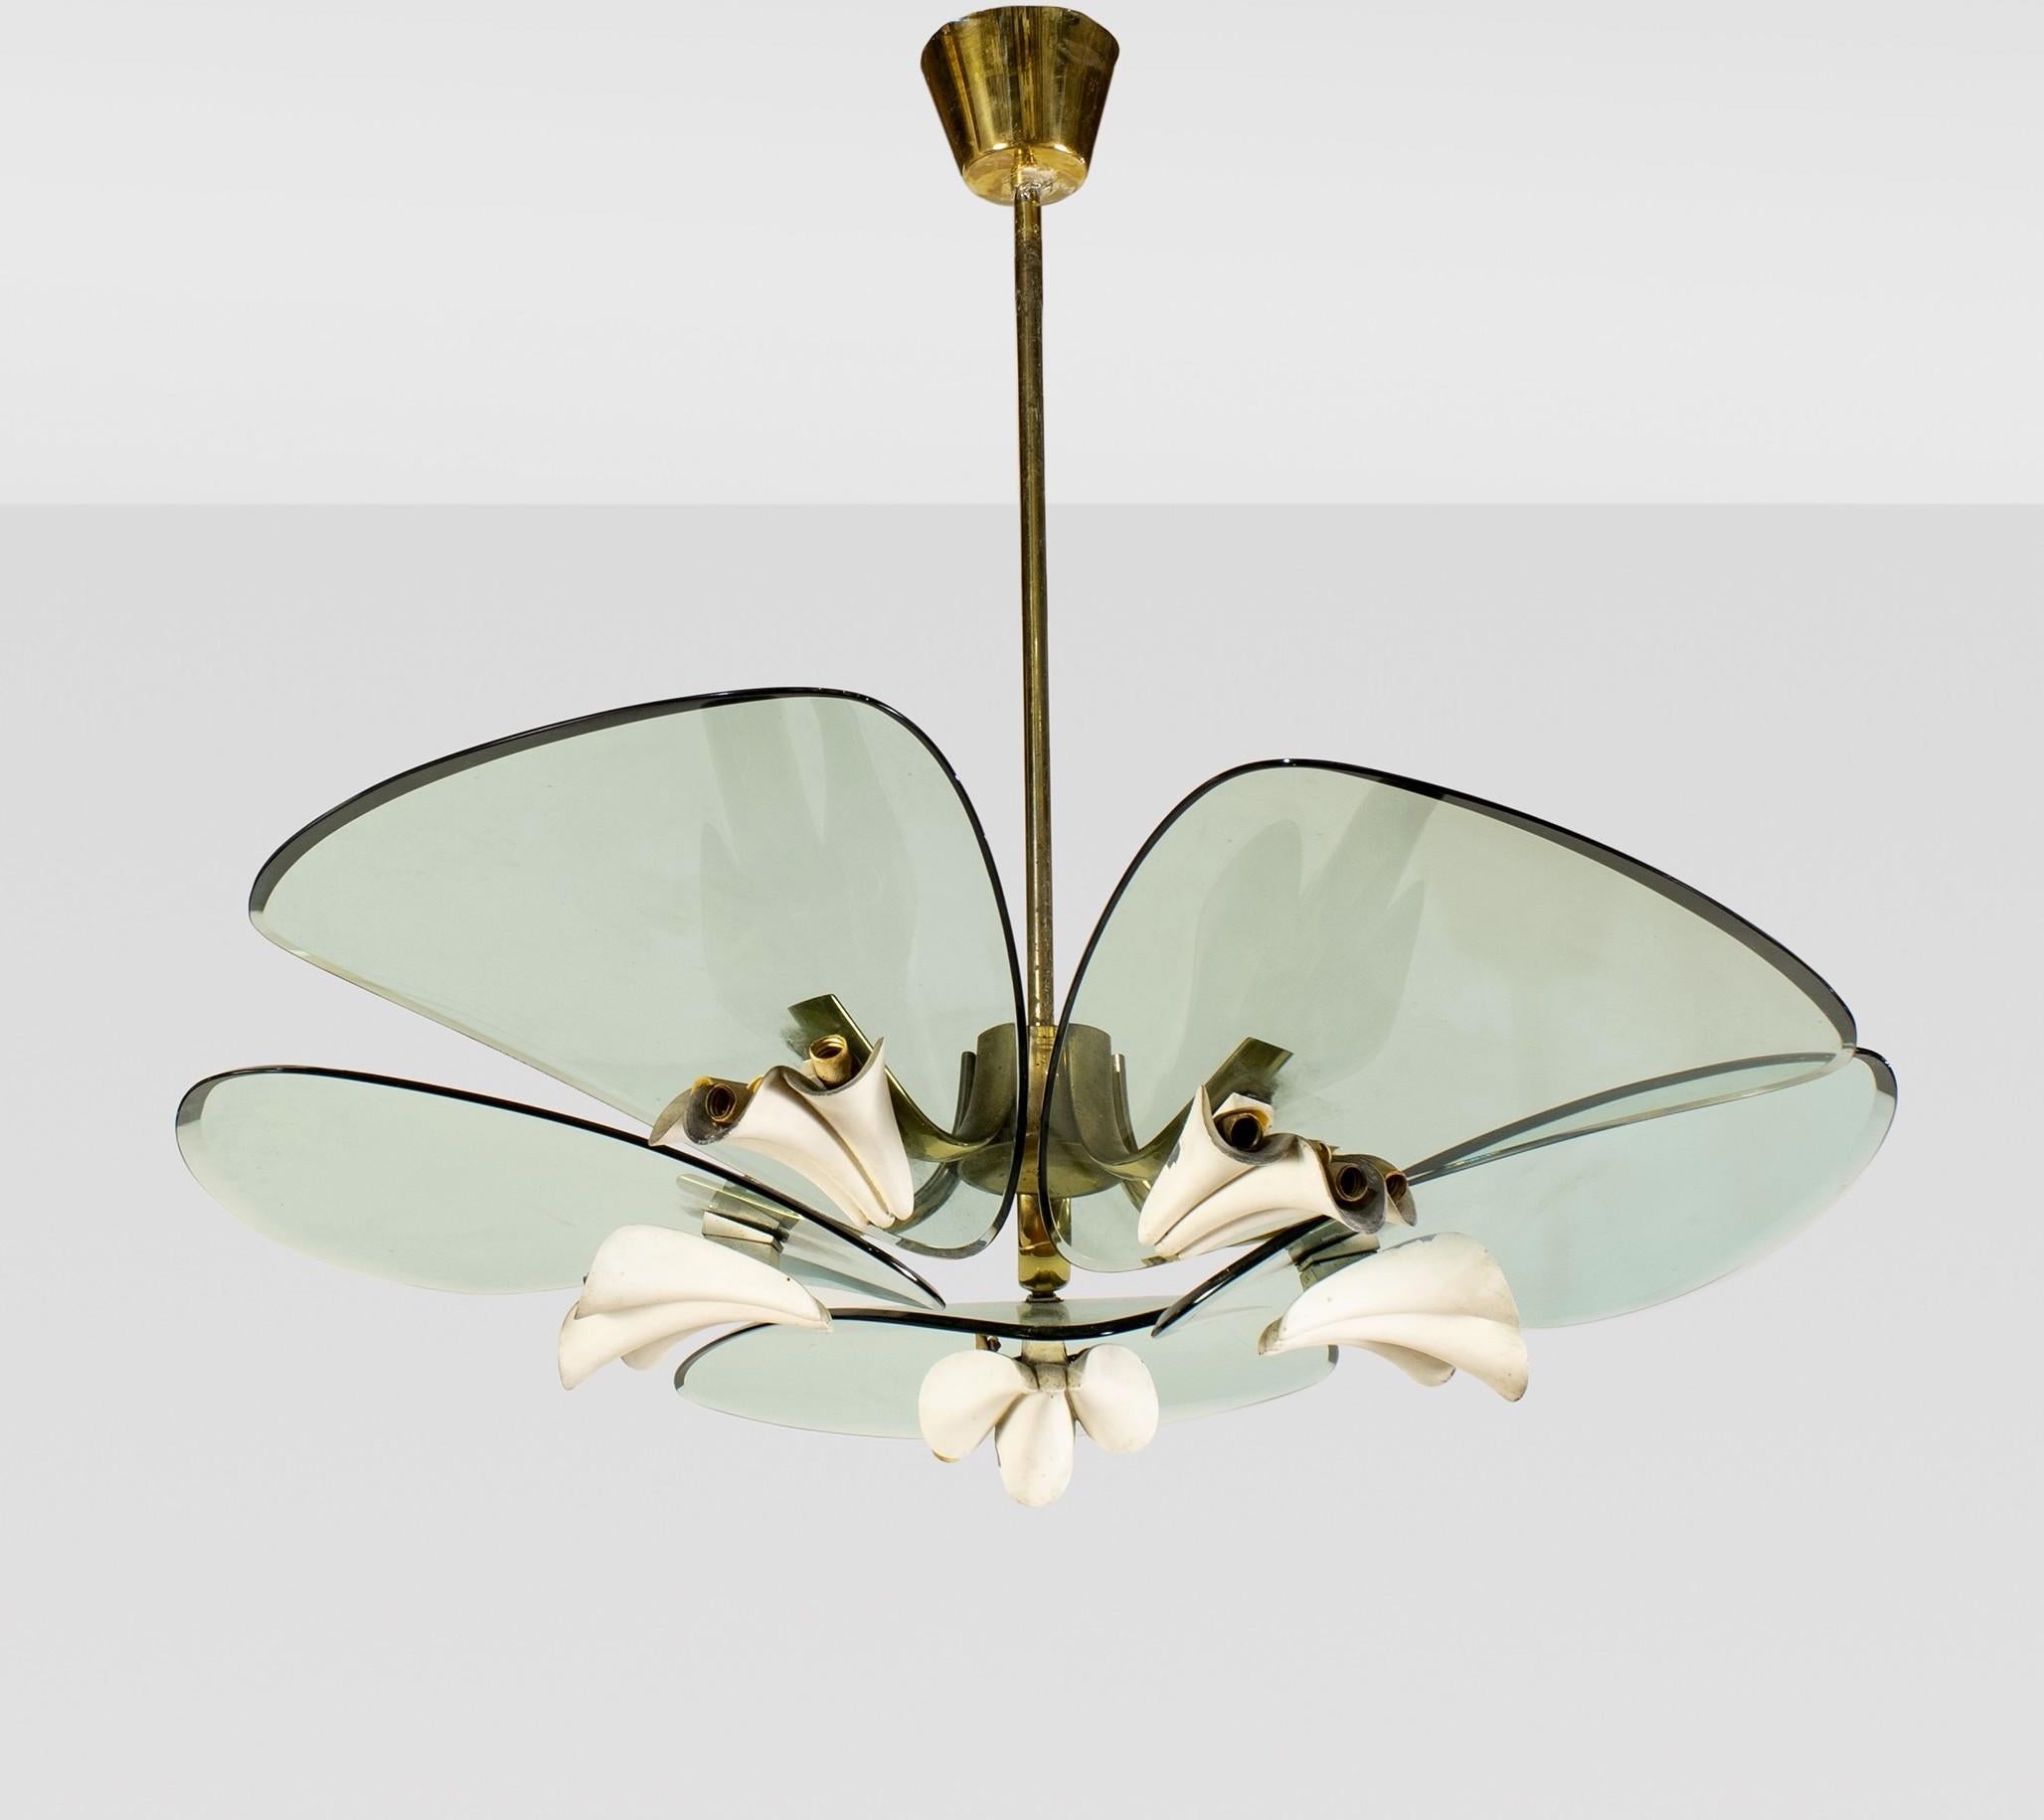 Fantastic and rare Fontana Arte chandelier with five large ground crystal petals. Elegant brass frame with 15 ivory painted aluminium light holders in excellent vintage condition. There are 15 E 14 light bulbs.
This piece is attributed to Fontana